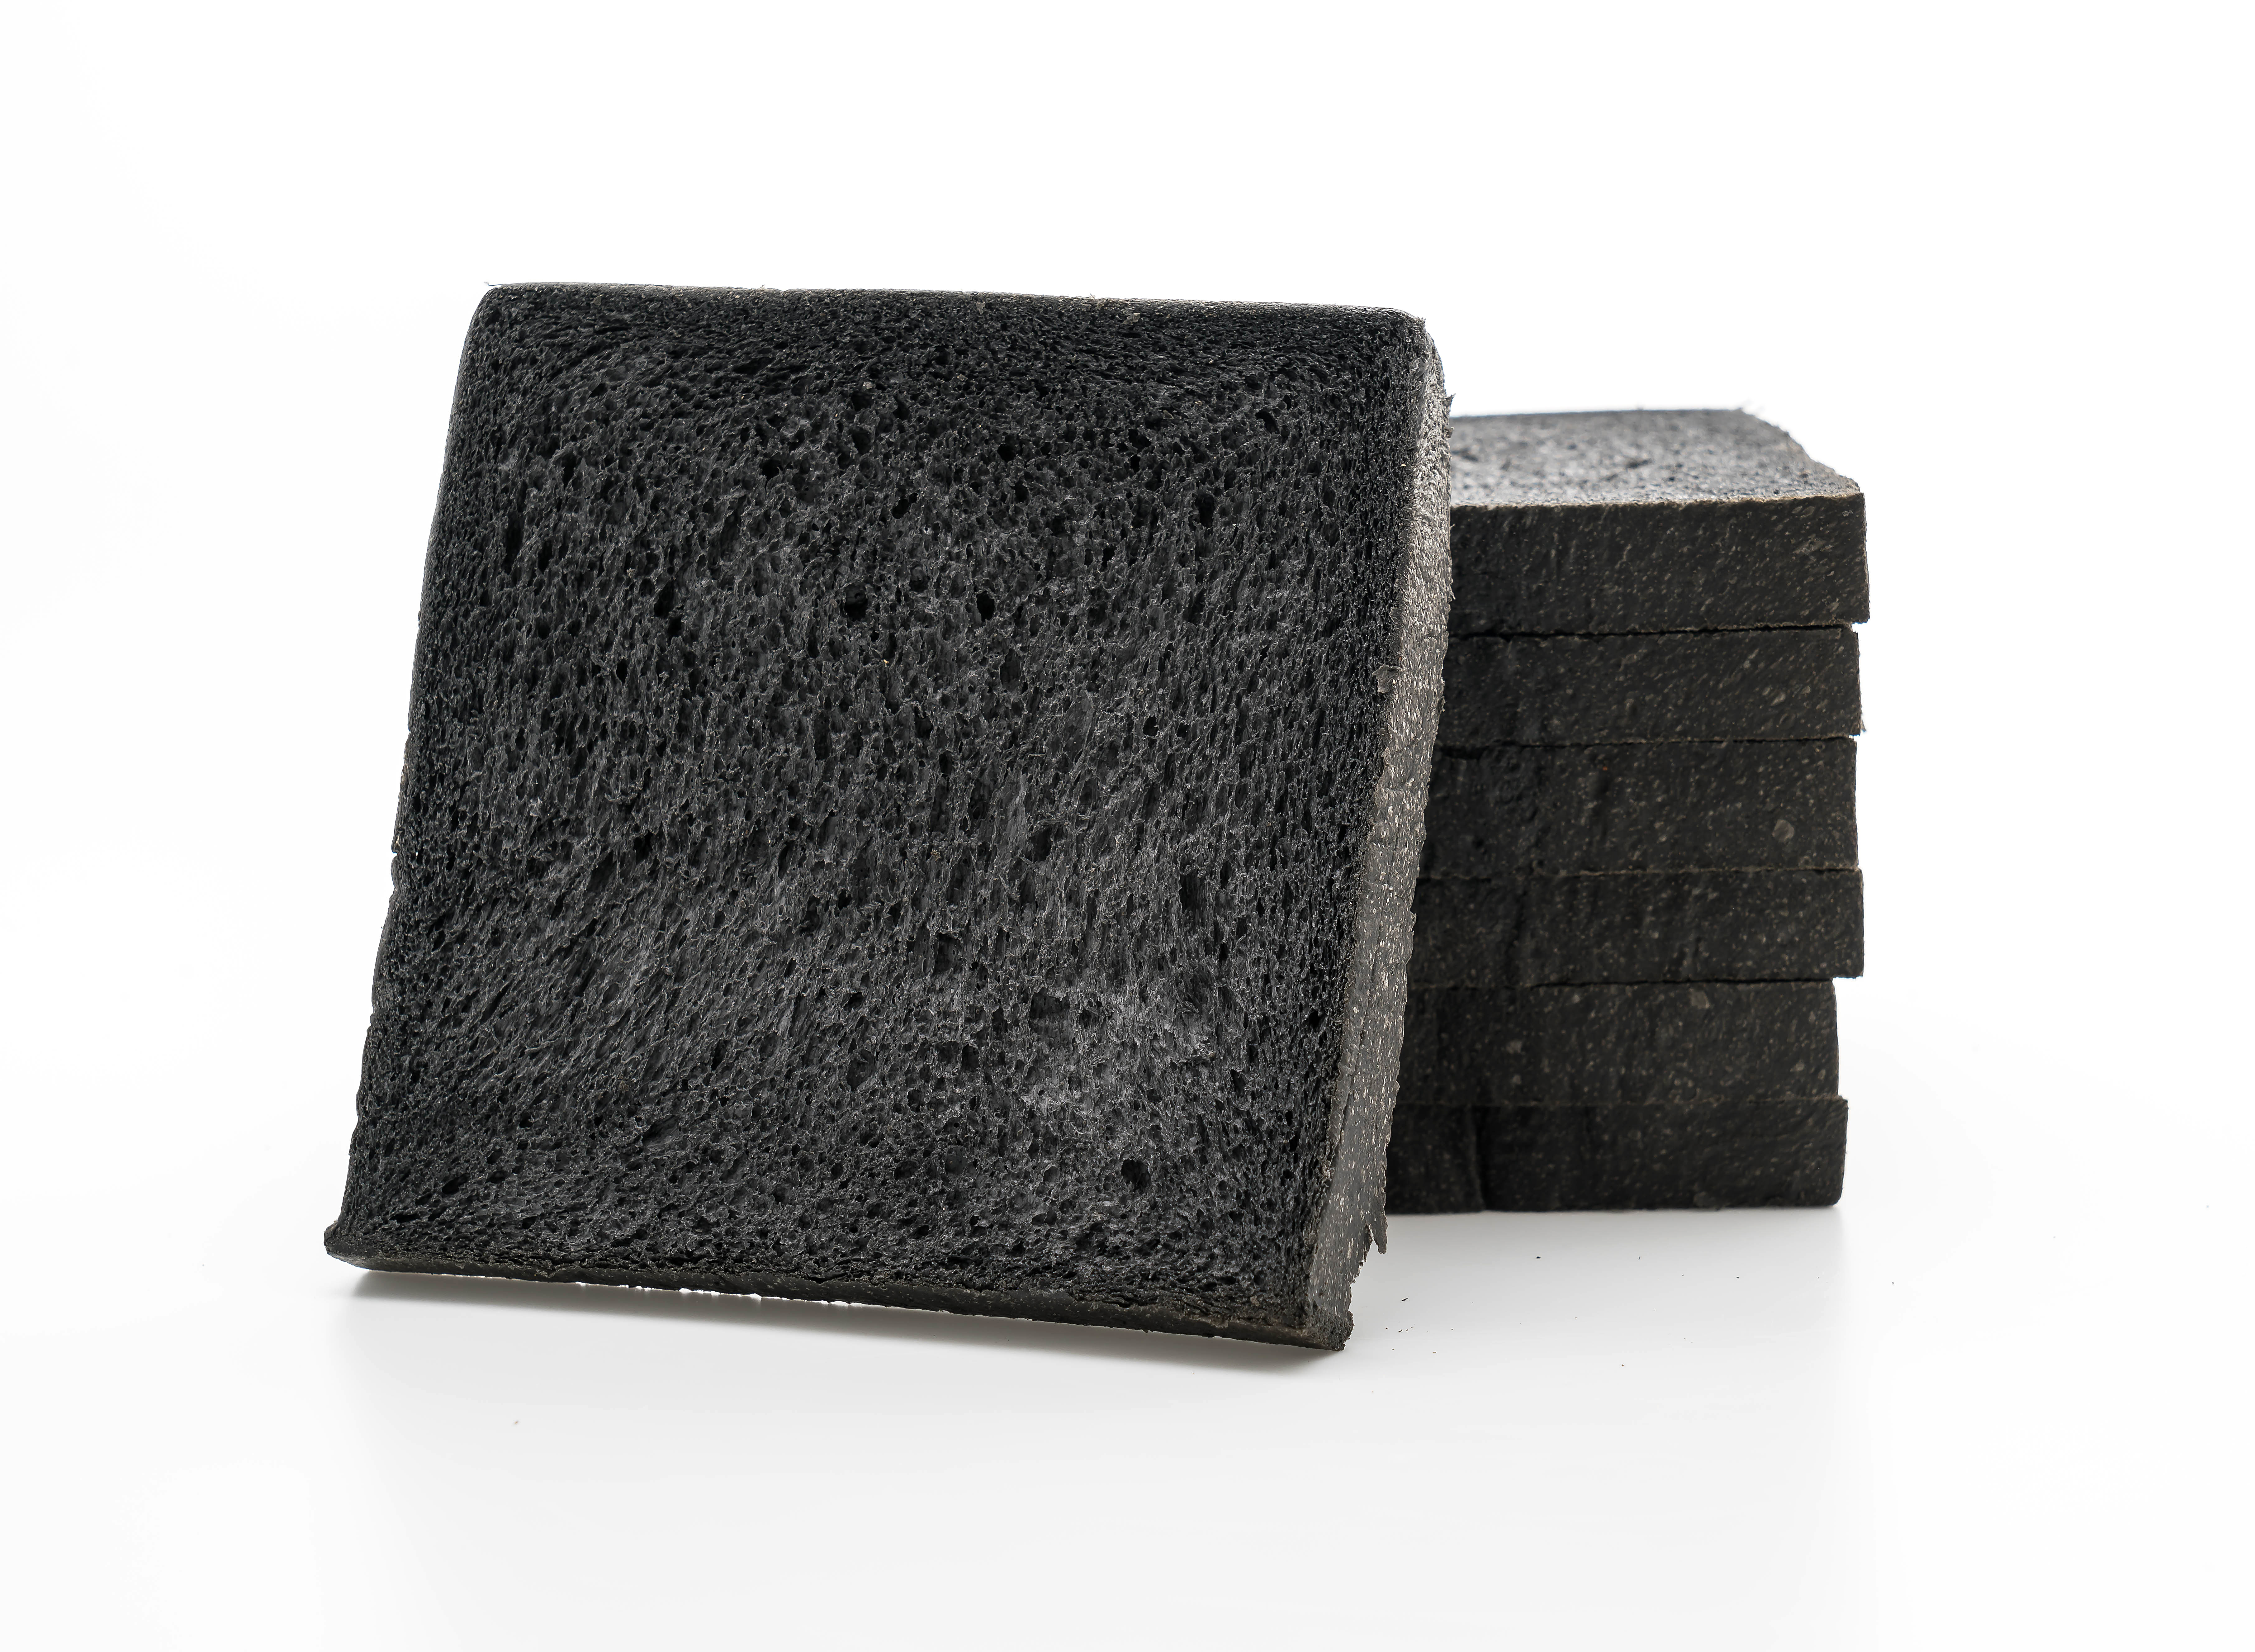 Block of carbon, charcoal